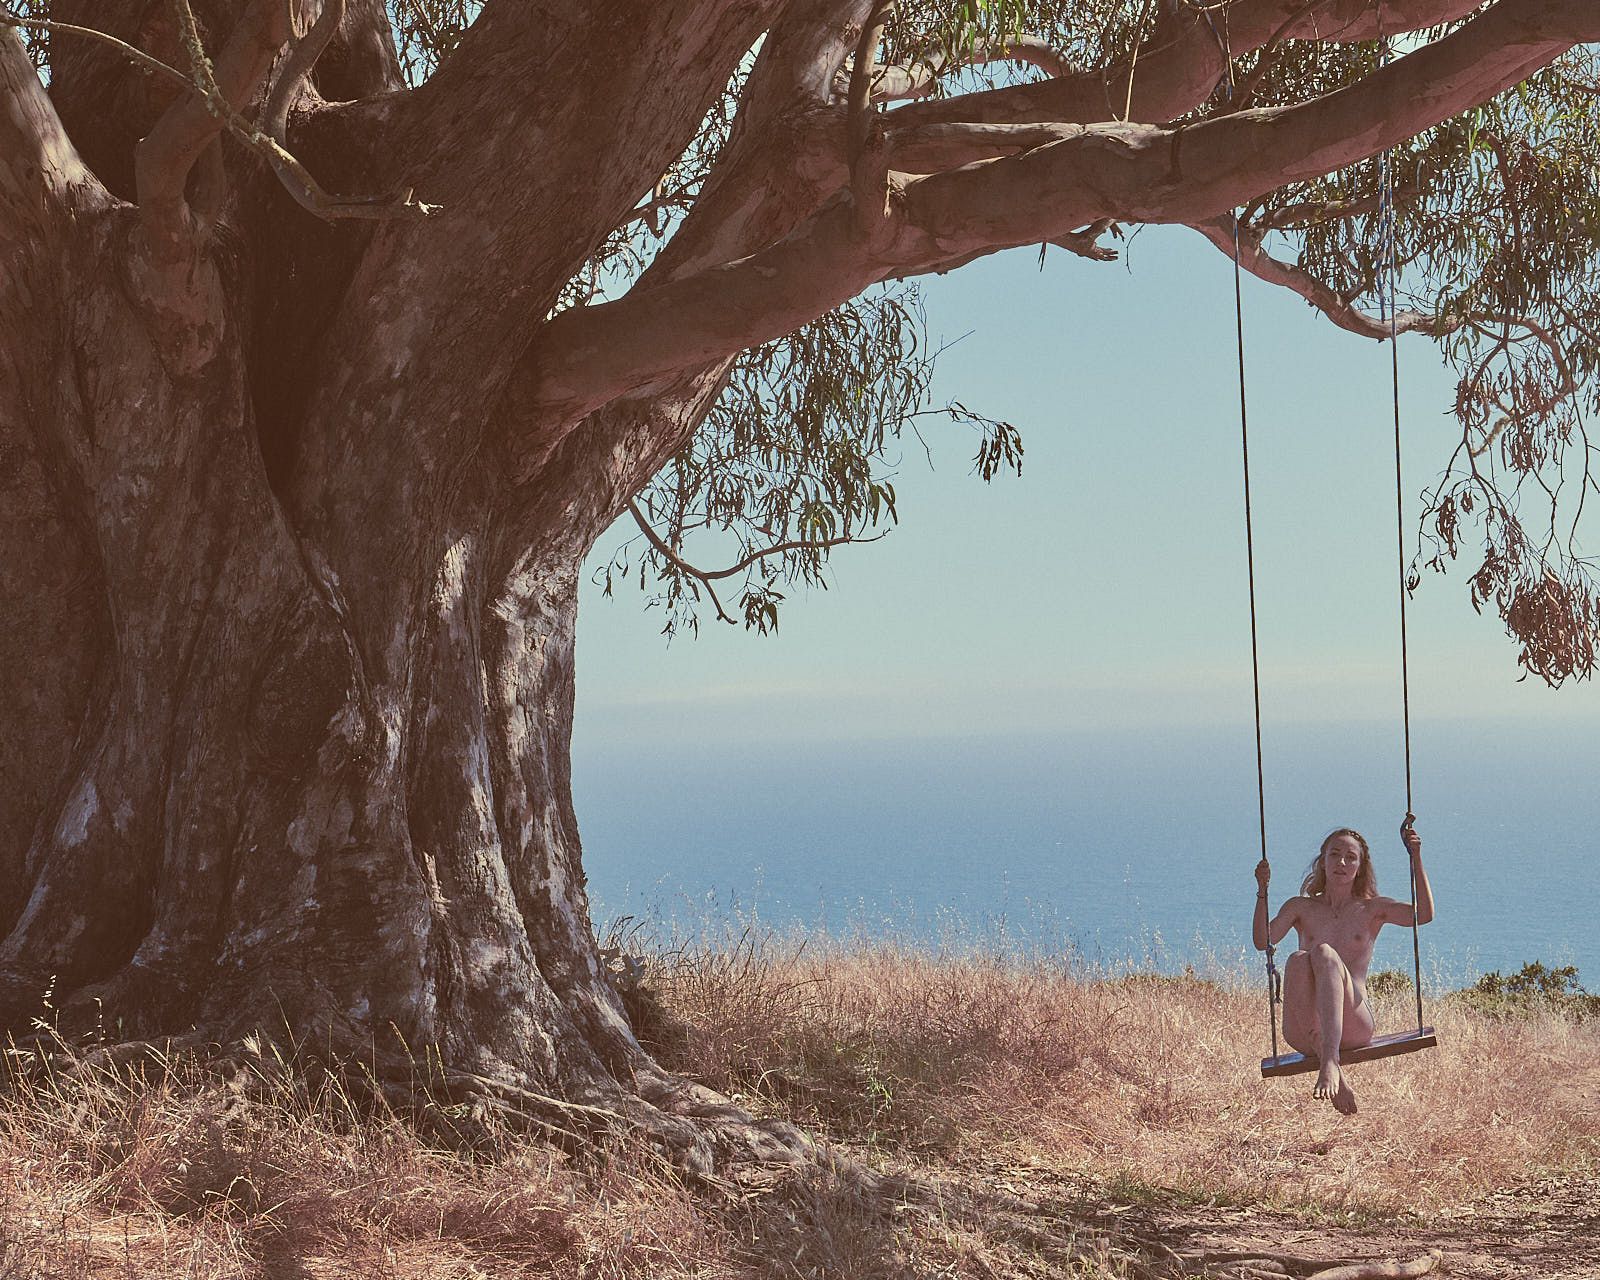 A picture of a young naked woman on a tree swing.